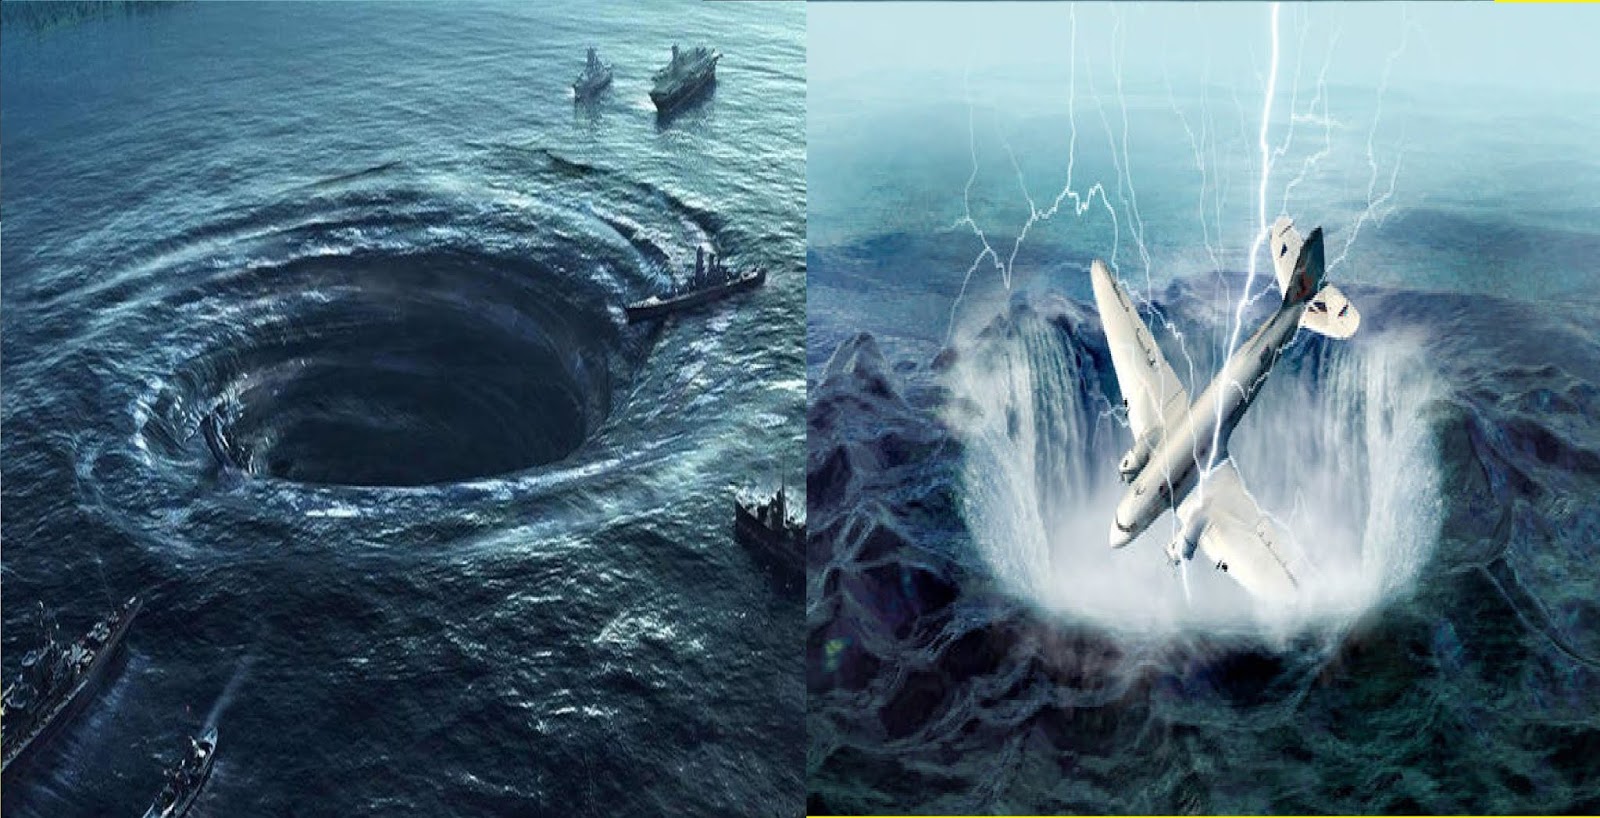 A new theory explains the mystery of the Bermuda Triangle